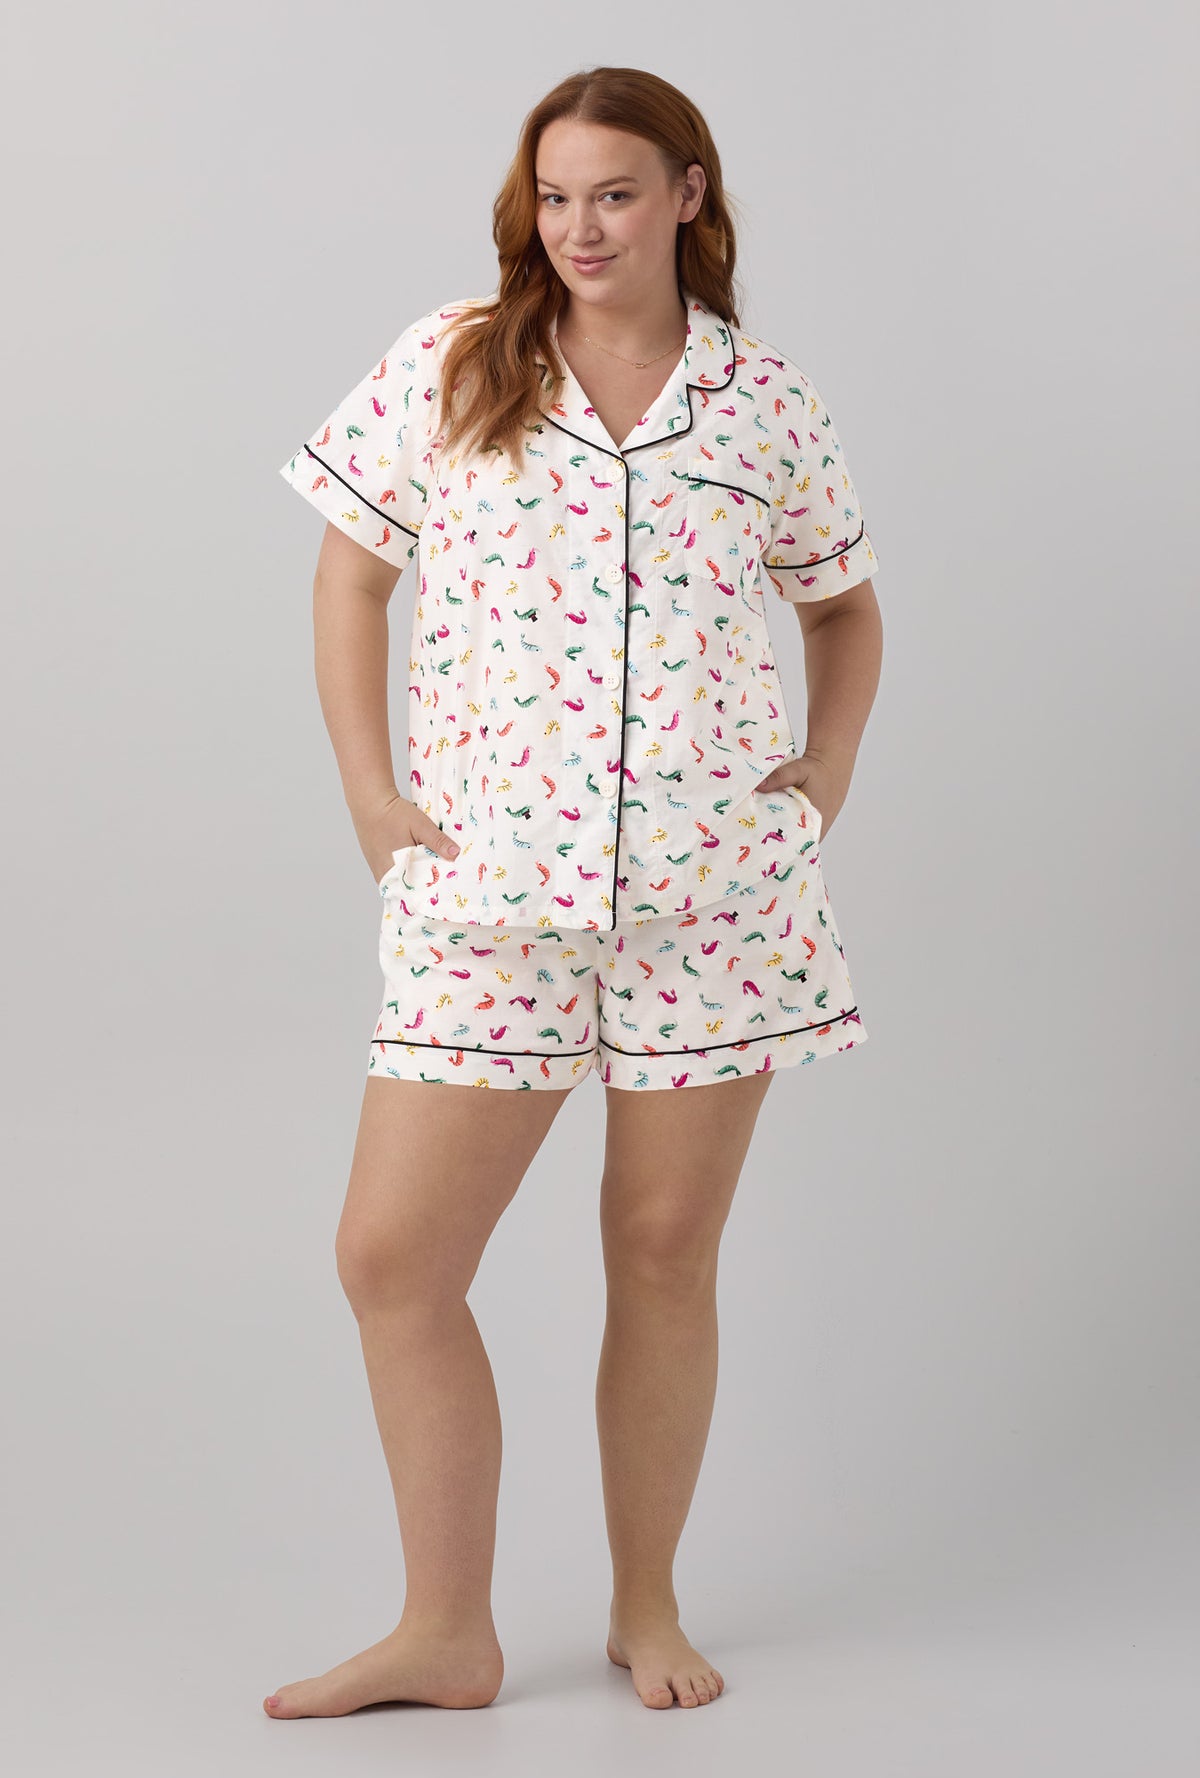 A lady wearing Short Sleeve Classic Woven Cotton Silk PJ Set with Shrimply The Best print